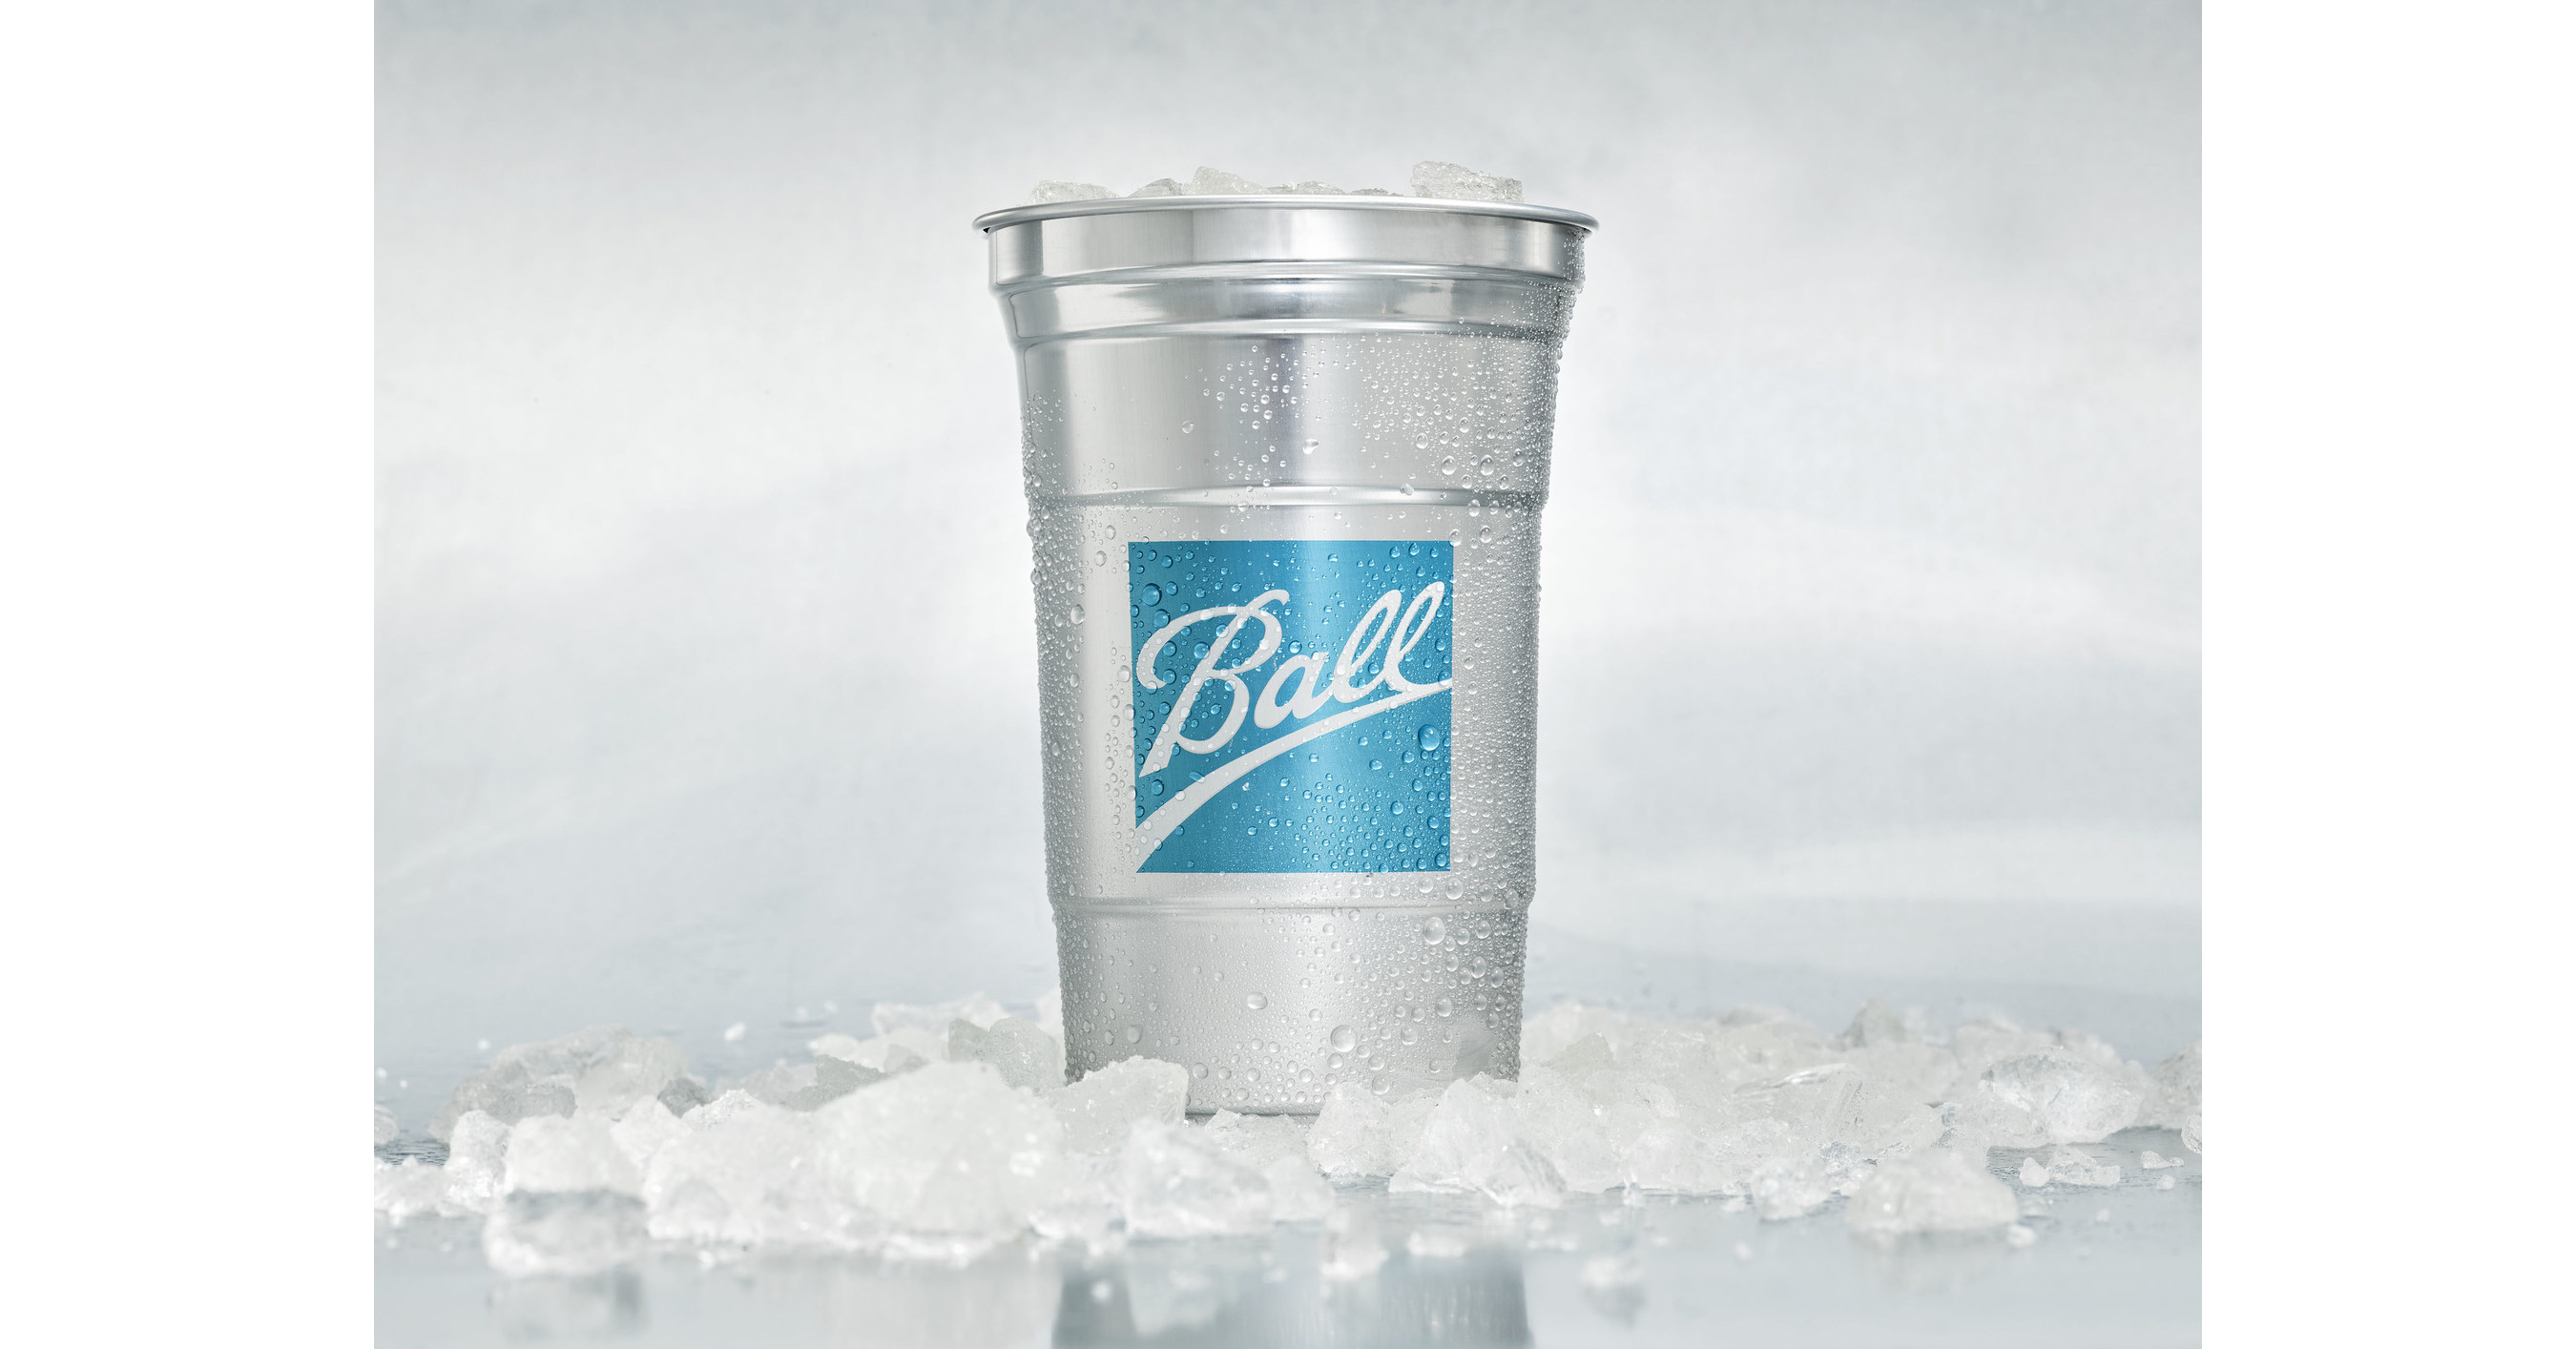 Ball Aluminum Cup Make a Statement Campaign - The Shorty Awards